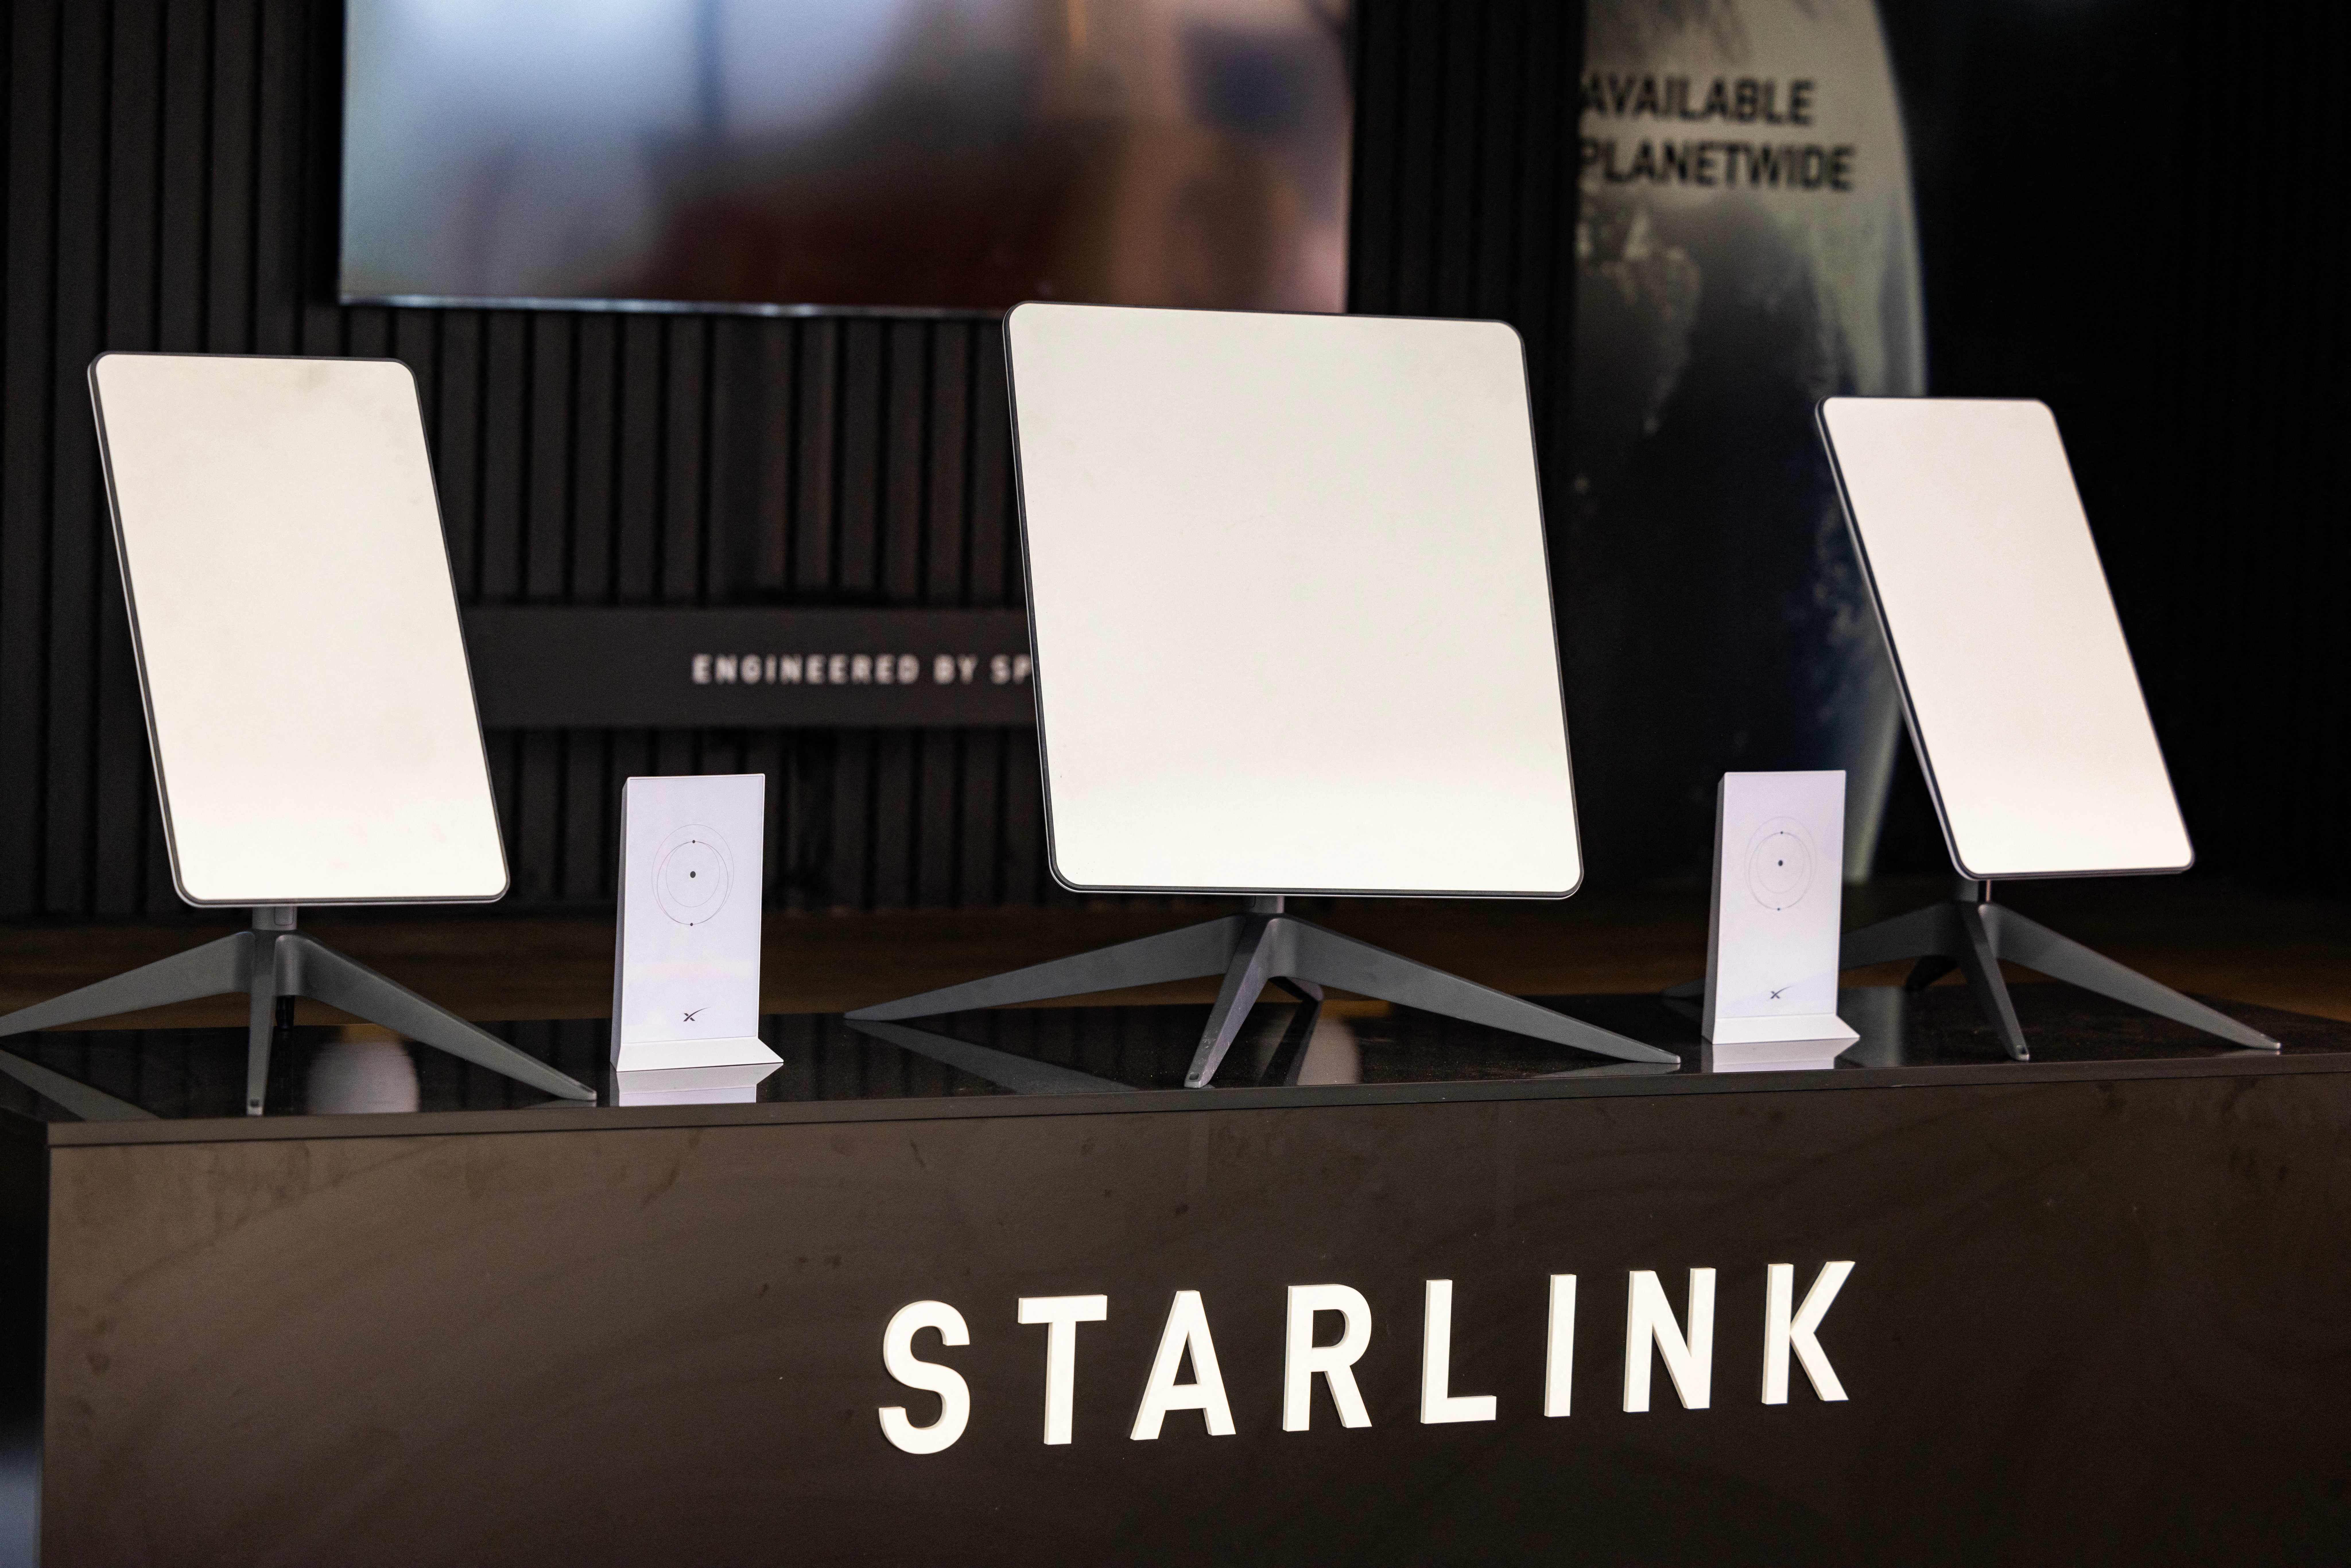 SpaceX: Starlink satellite internet service has over 10,000 users